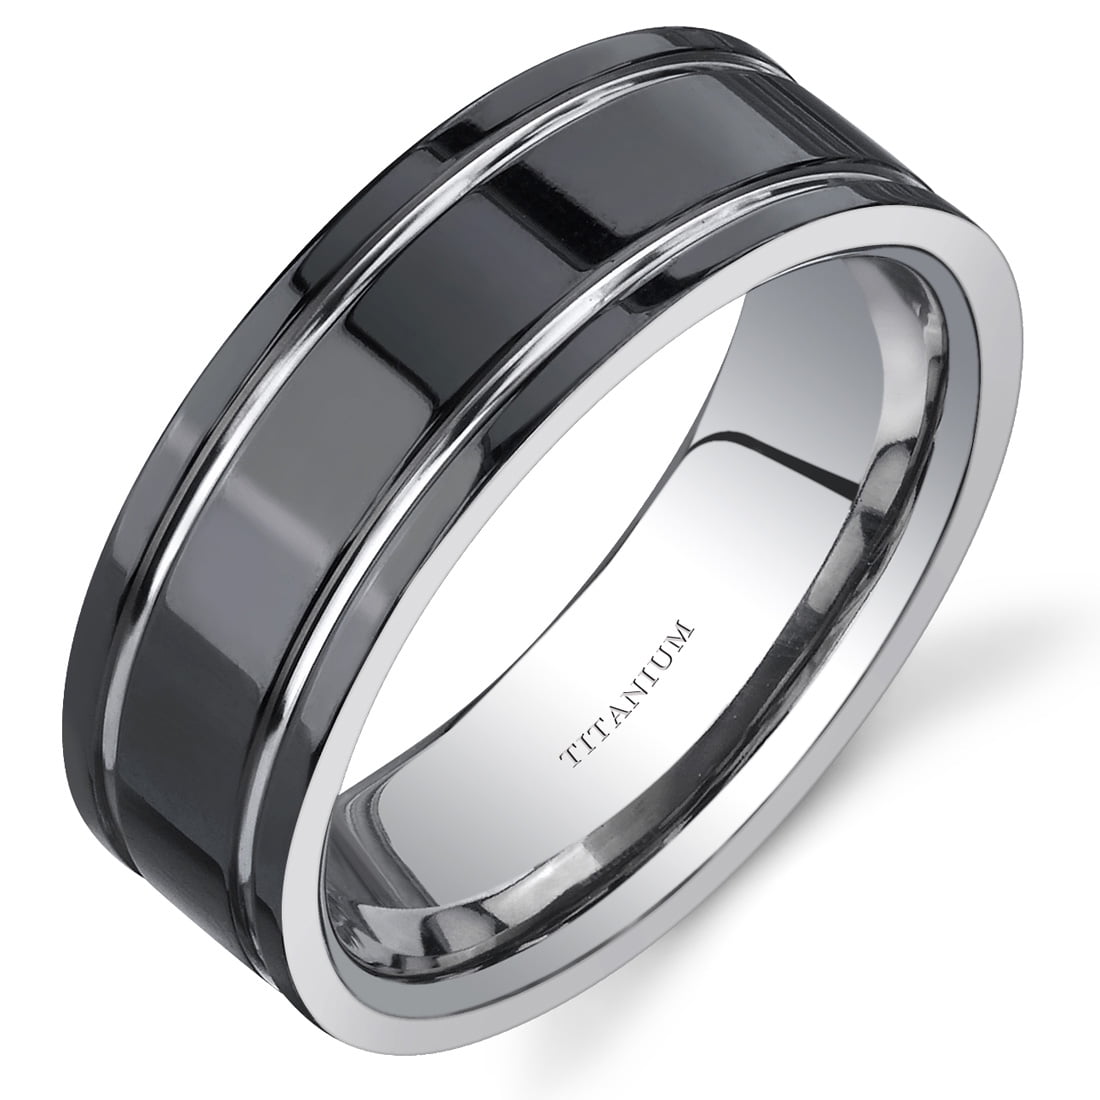 Friends of Irony Black Tungsten Carbide Gymnastics Ring 8mm Wedding Band Anniversary Ring for Men and Women Size 10